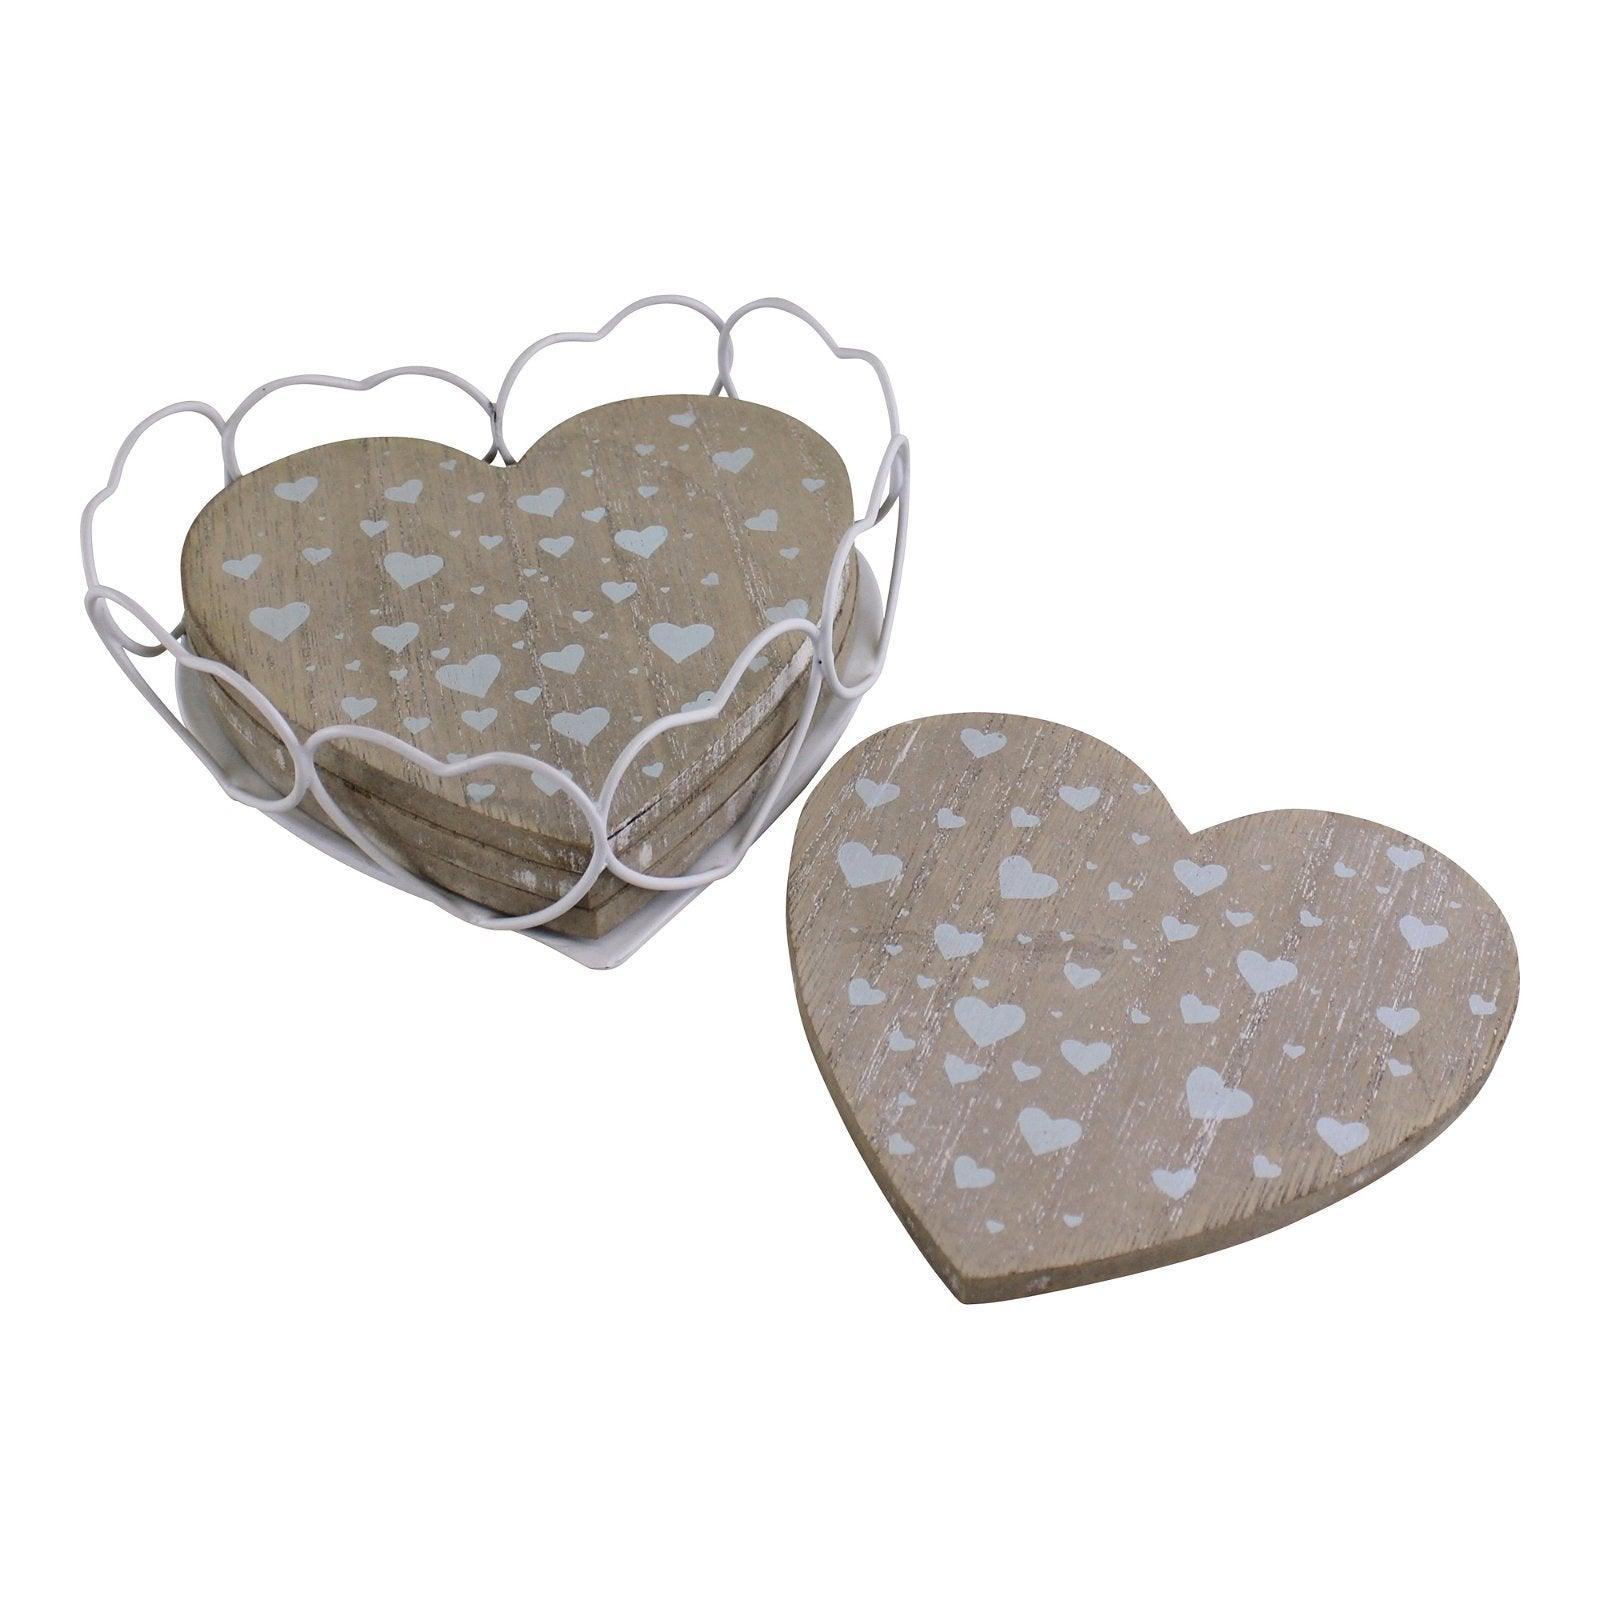 Set Of 4 Heart Shaped Coasters In Wire Holder-Coasters & Placemats